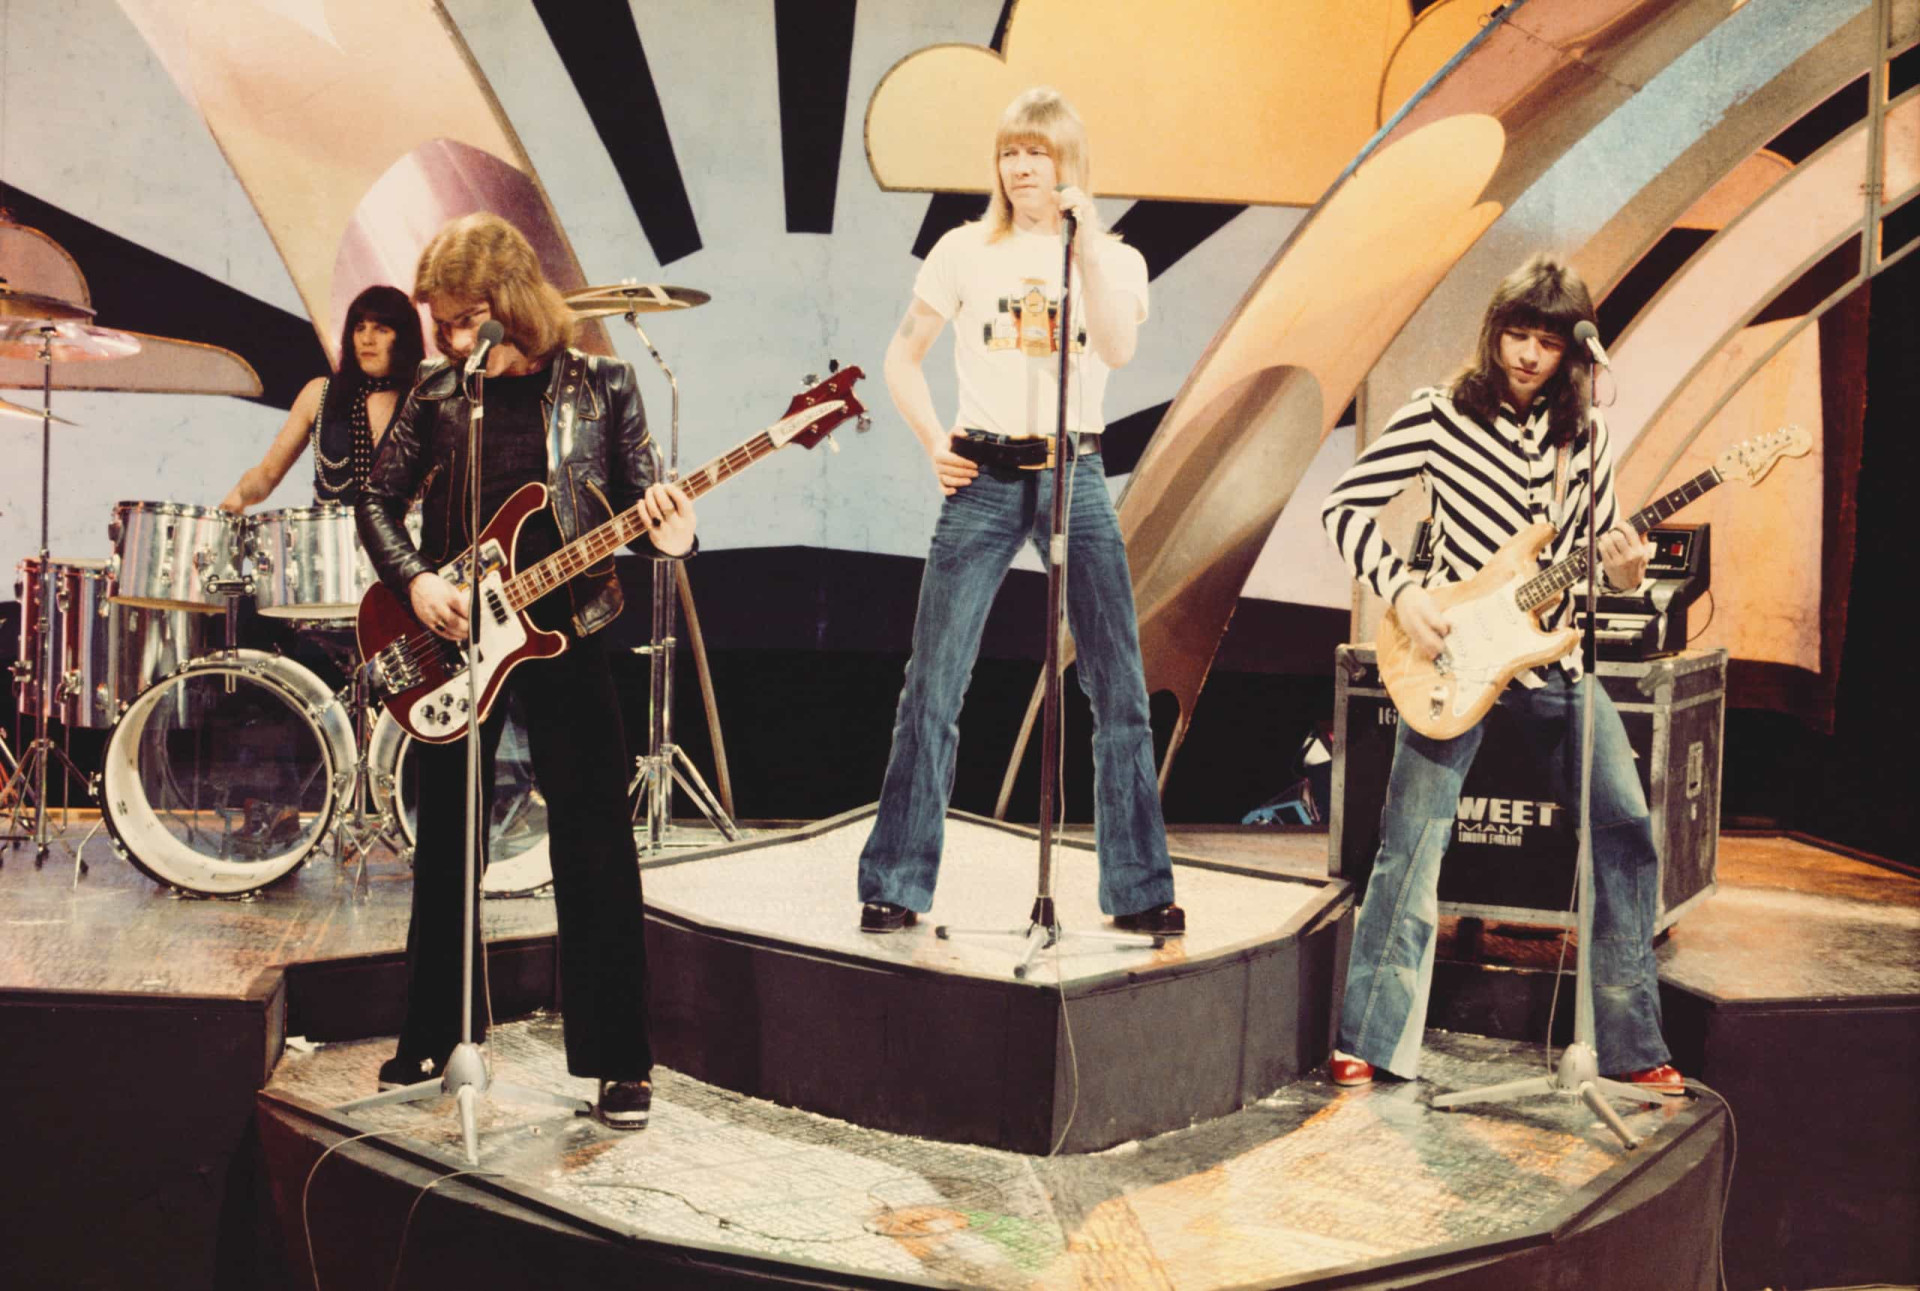 <p>British glam rock band Sweet rose to prominence in the early 1970s. 'Fox on the Run' was written by all four members of the band—Brian Connolly, Steve Priest, Andy Scott , and Mick Tucker.</p> <p>Sources: (<a href="https://www.pastemagazine.com/music/best-selling-albums/the-best-selling-albums-of-all-time/#17-meat-loaf-bat-out-of-hell" rel="noopener">Paste Magazine</a>) (<a href="https://faroutmagazine.co.uk/who-was-rolling-stones-wild-horses-written-about/" rel="noopener">Far Out Magazine</a>) (<a href="https://www.songfacts.com/facts/nicki-minaj/anaconda" rel="noopener">Songfacts</a>) </p> <p>See also: <a href="https://www.starsinsider.com/music/356644/musical-animals-creatures-that-feature-on-songs">Creatures that feature on songs</a></p><p><a href="https://www.msn.com/en-my/community/channel/vid-7xx8mnucu55yw63we9va2gwr7uihbxwc68fxqp25x6tg4ftibpra?cvid=94631541bc0f4f89bfd59158d696ad7e">Follow us and access great exclusive content every day</a></p>